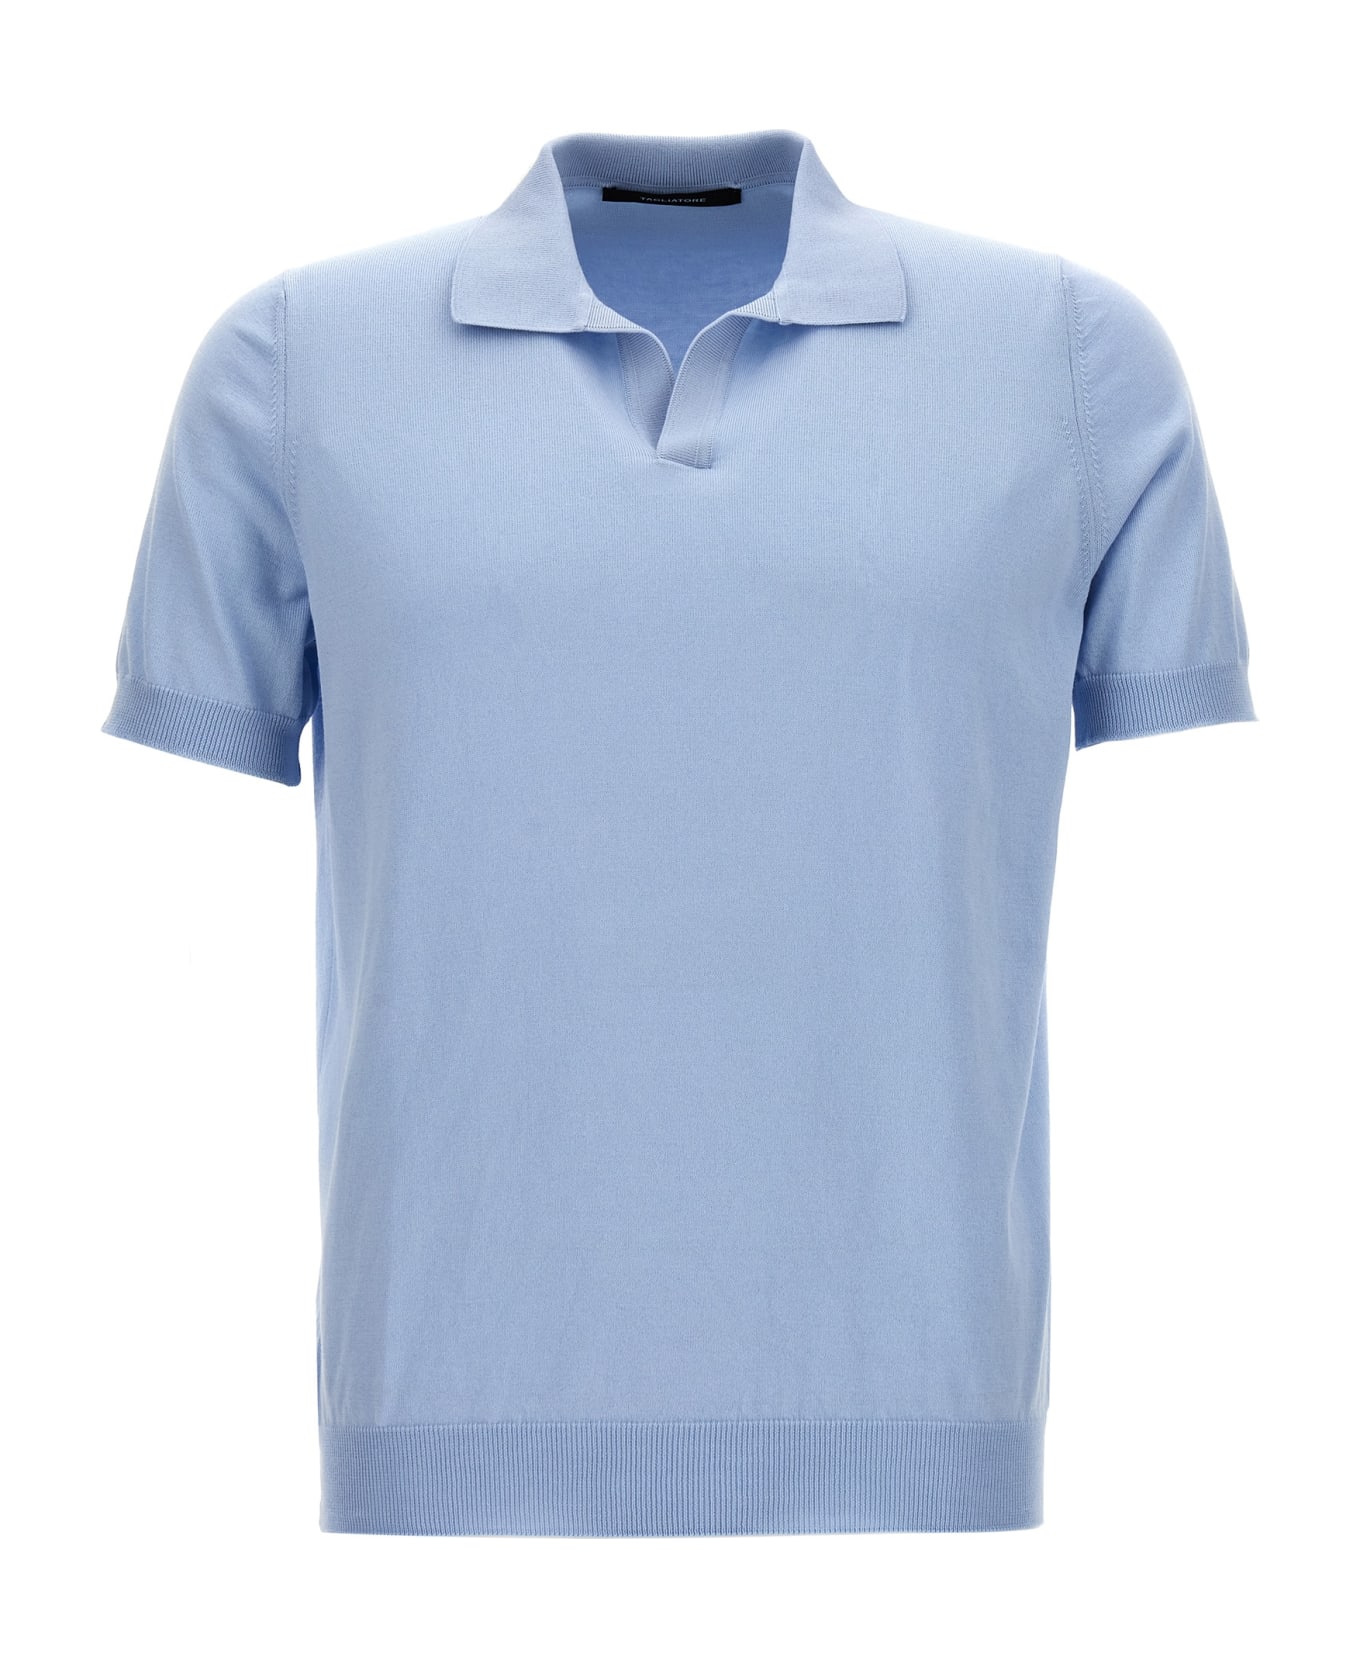 Tagliatore Knitted Polo Shirt - Light Blue ポロシャツ